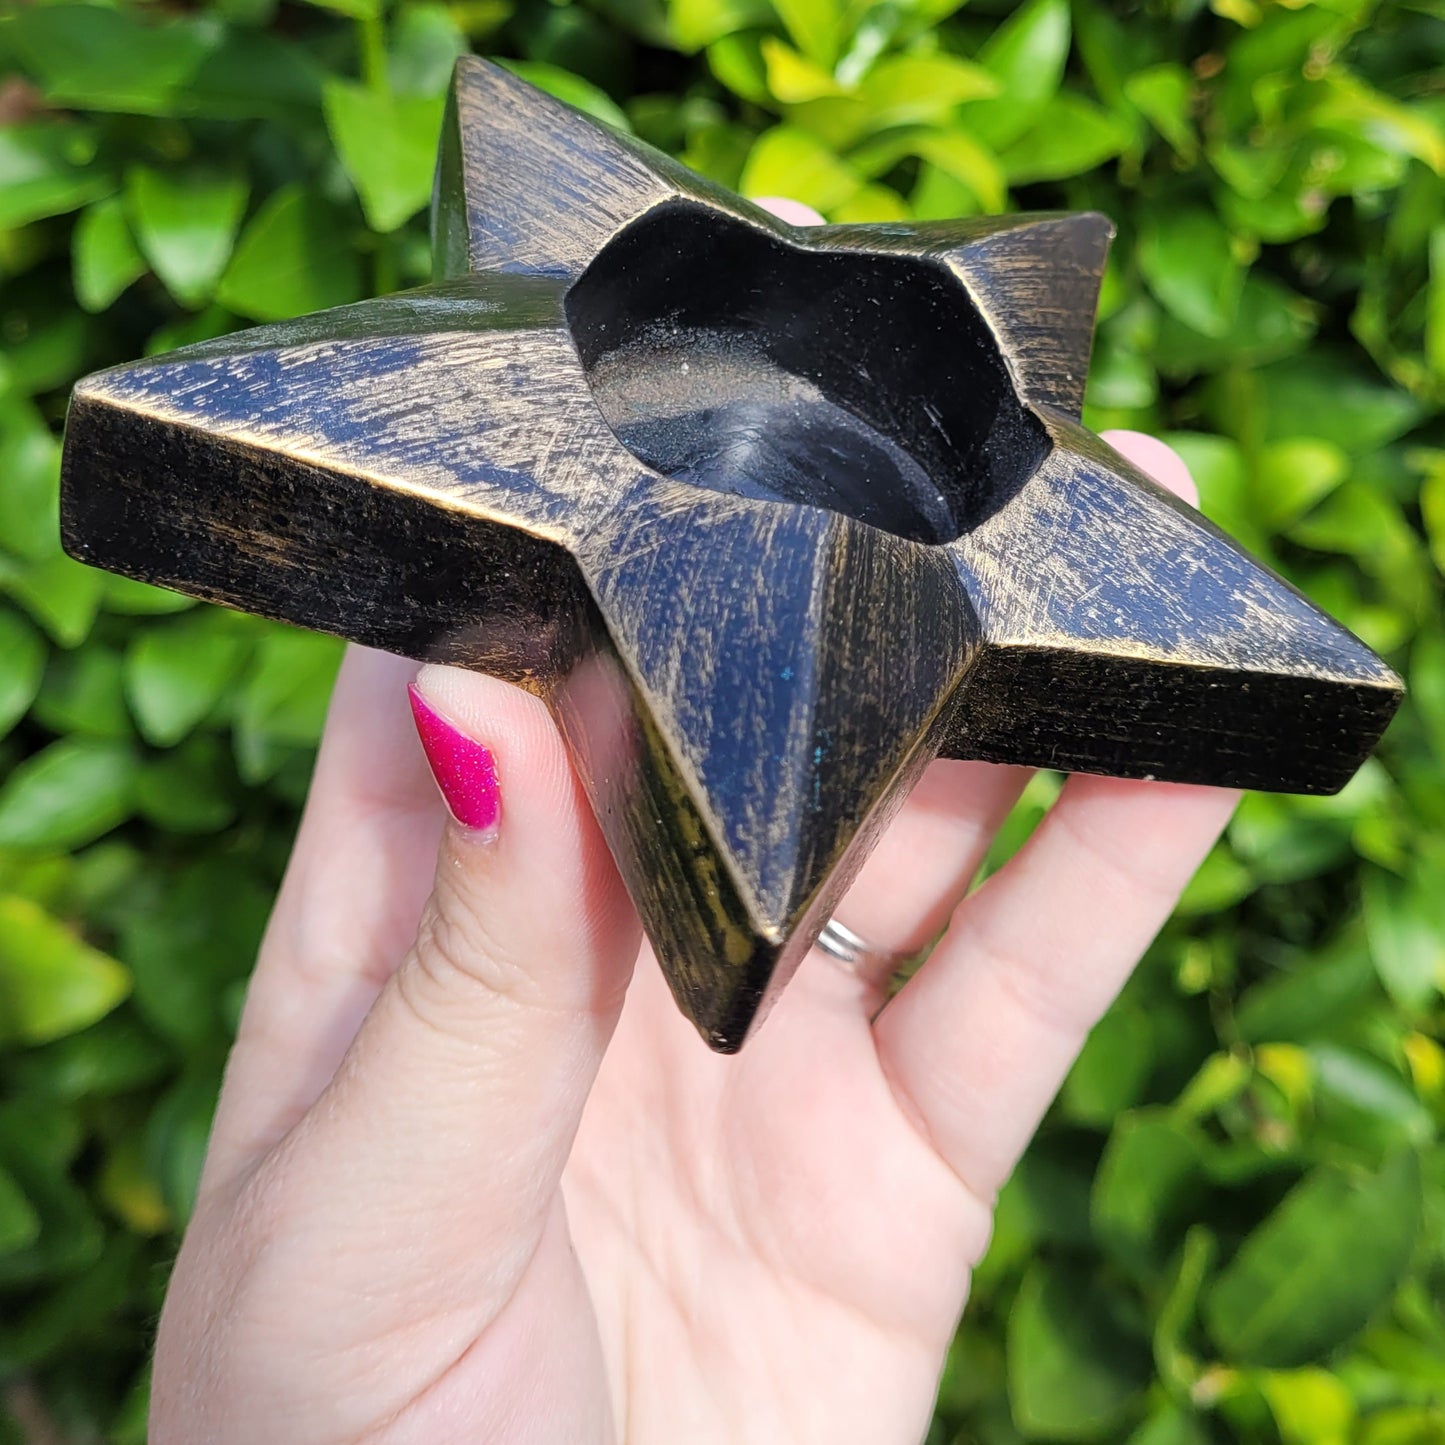 Wood Star Shaped Sphere Display Stand, in Black and Bronze, for Crystal Balls 2" to 3.5" (50mm to 90mm)